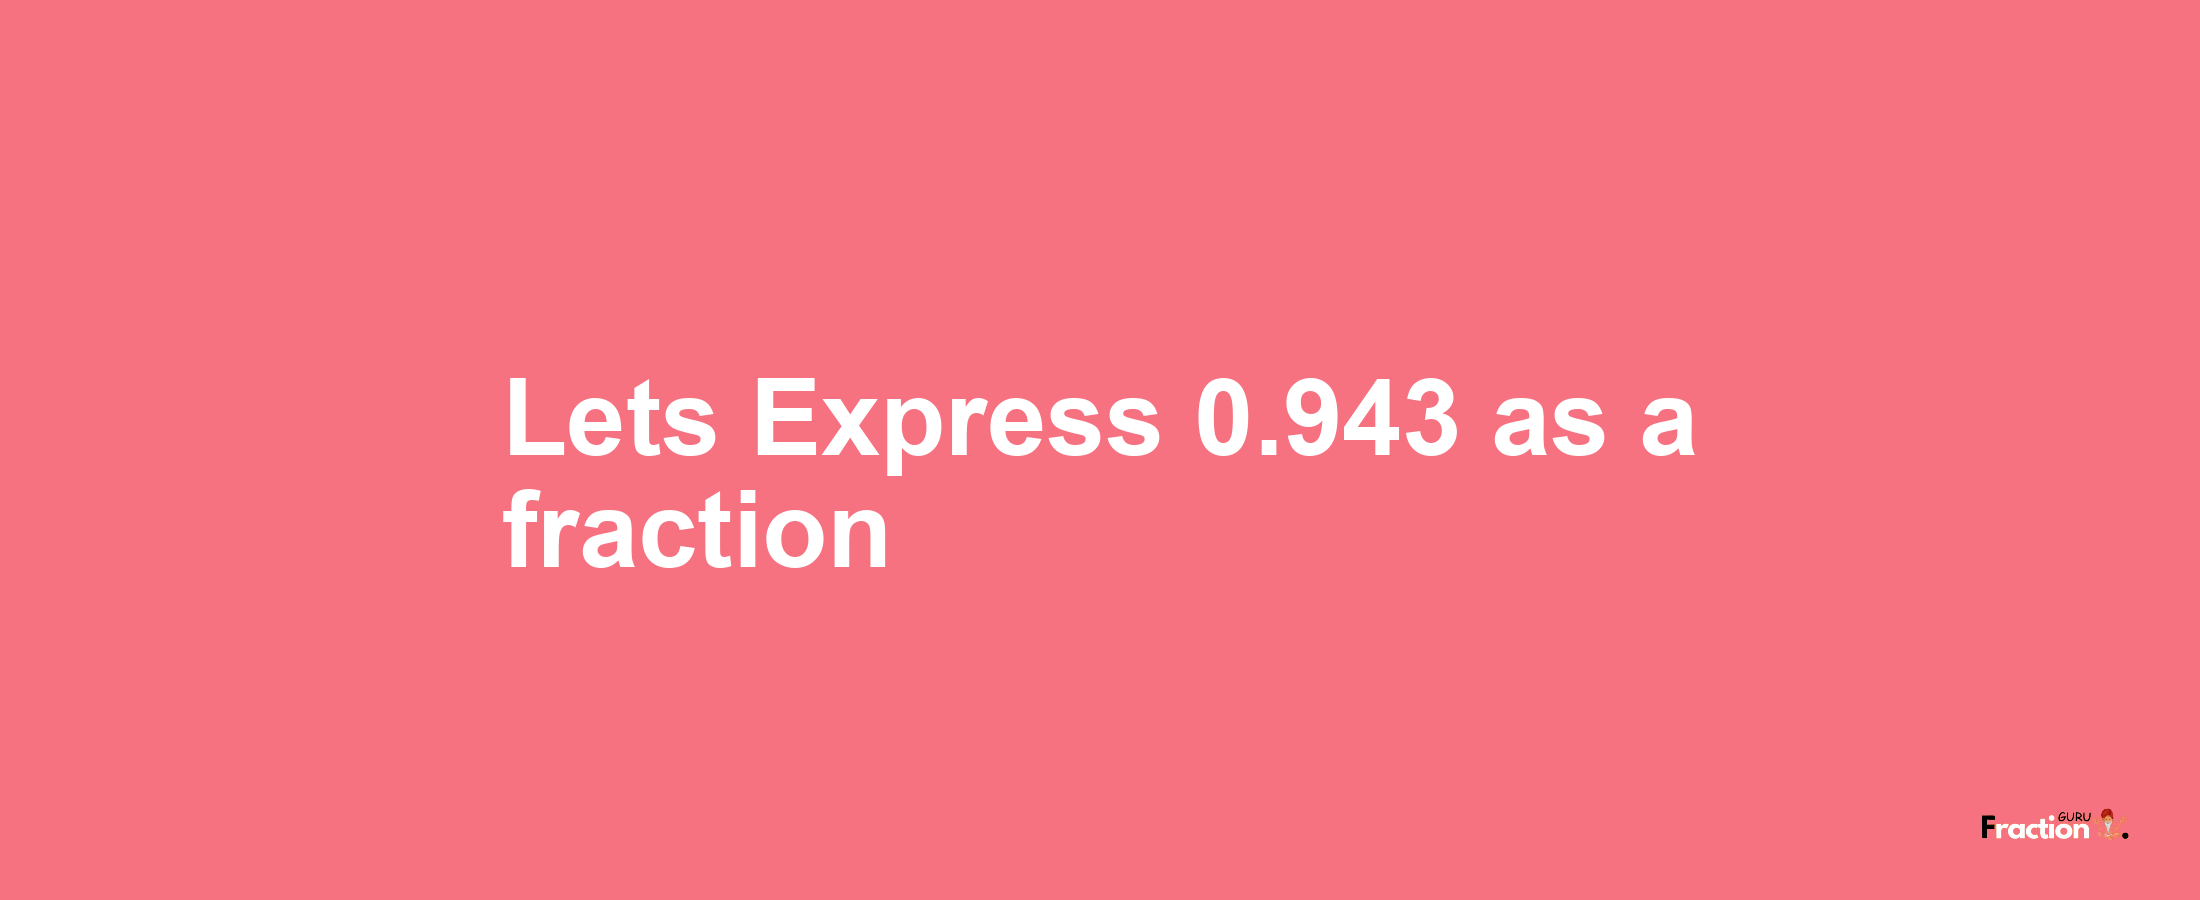 Lets Express 0.943 as afraction